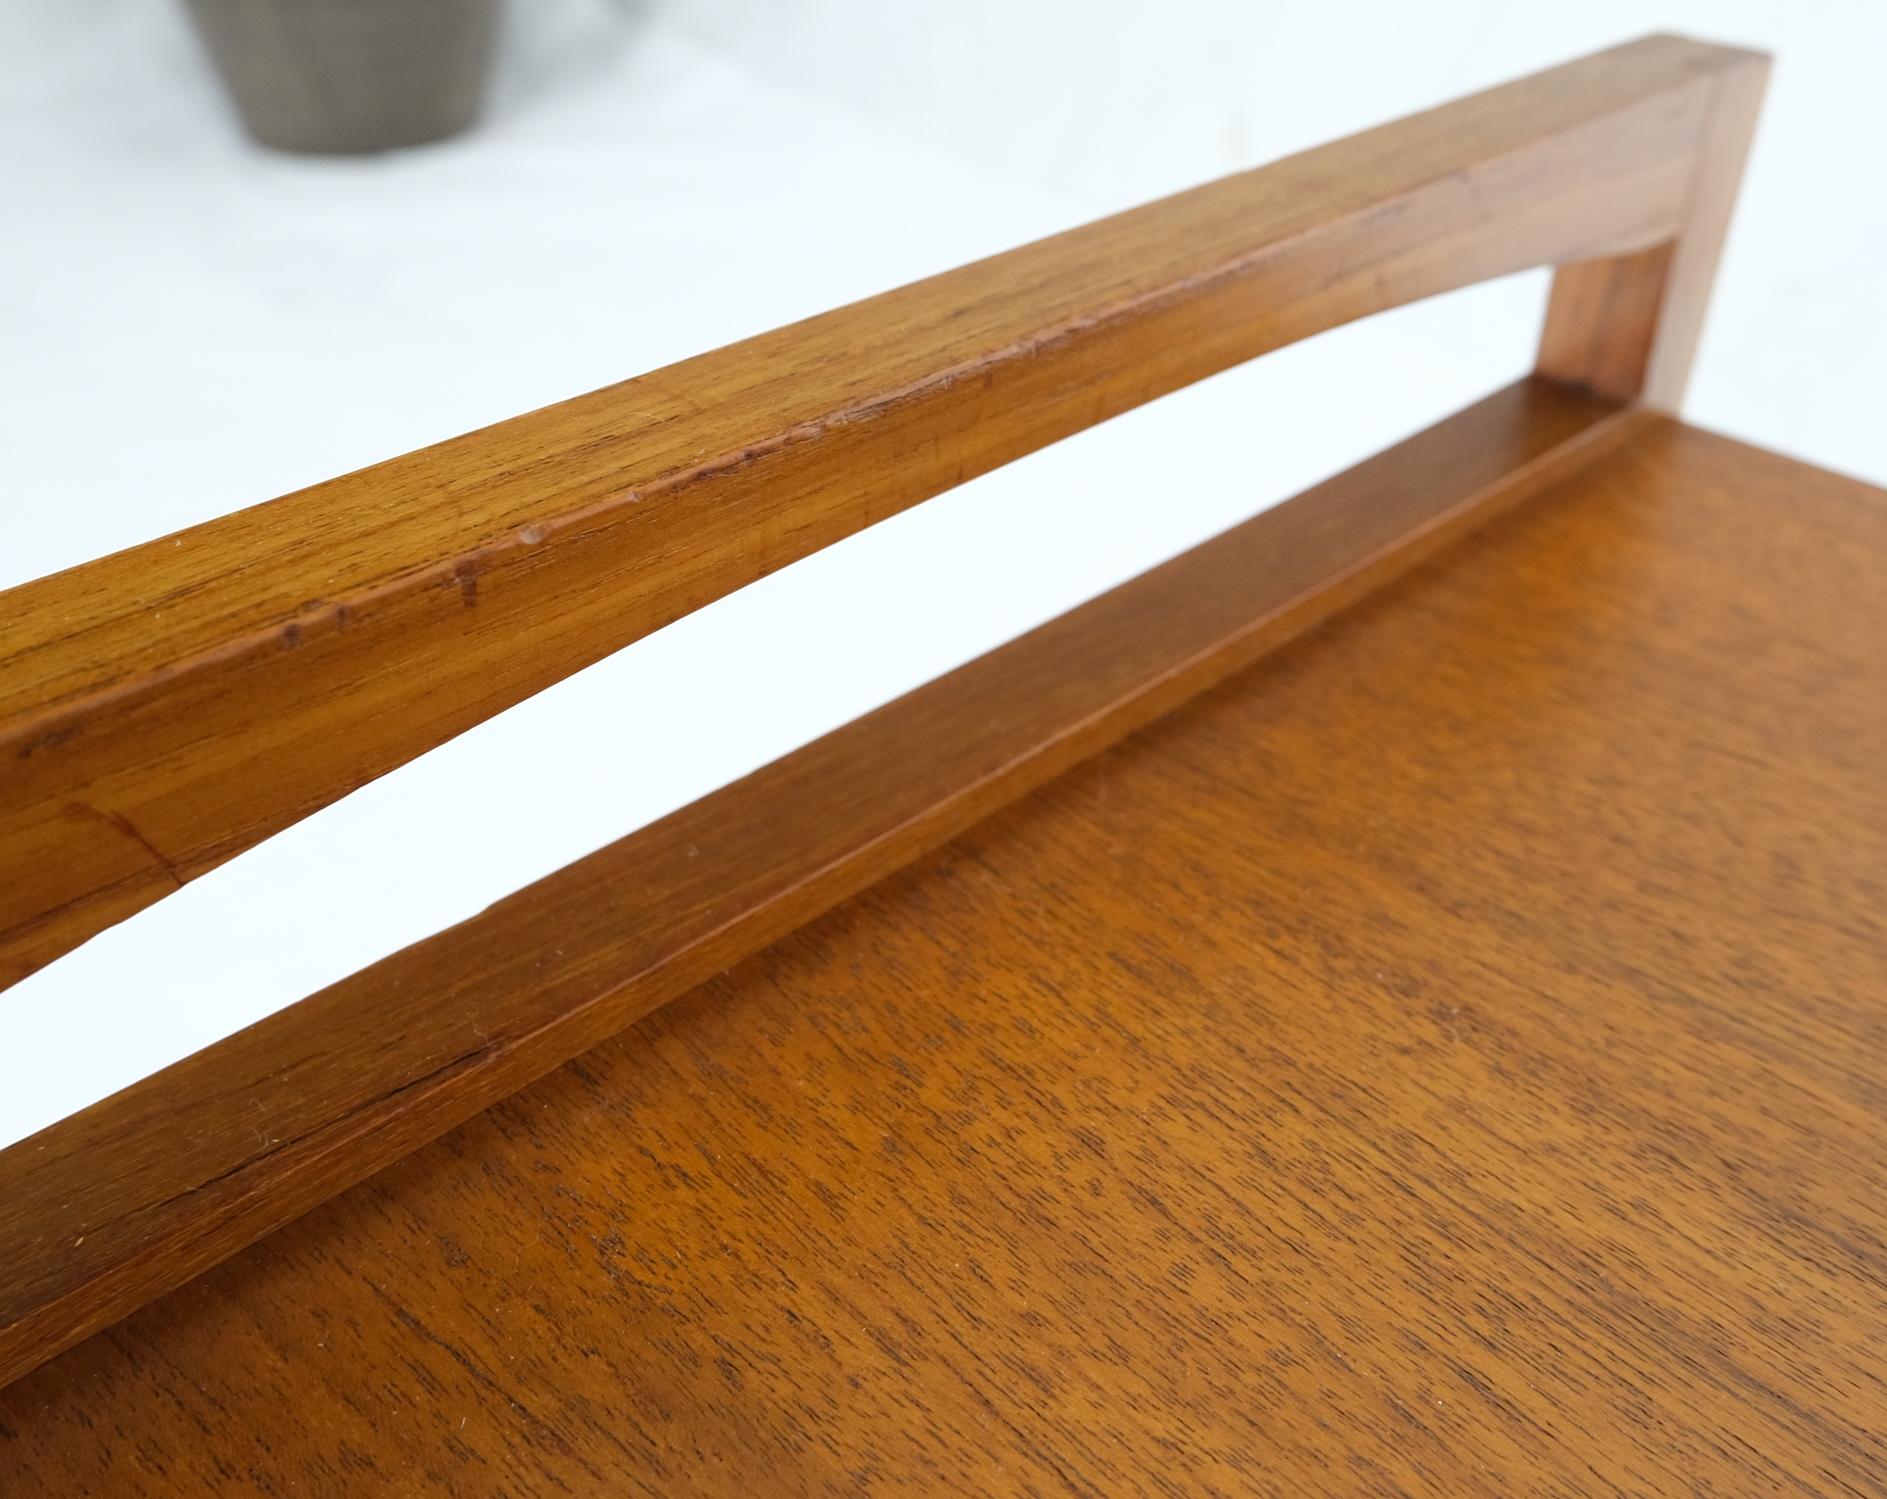 20th Century Teak And Suede Sling Shelf Mid-Century Modern End Table Stand Magazine Rack For Sale